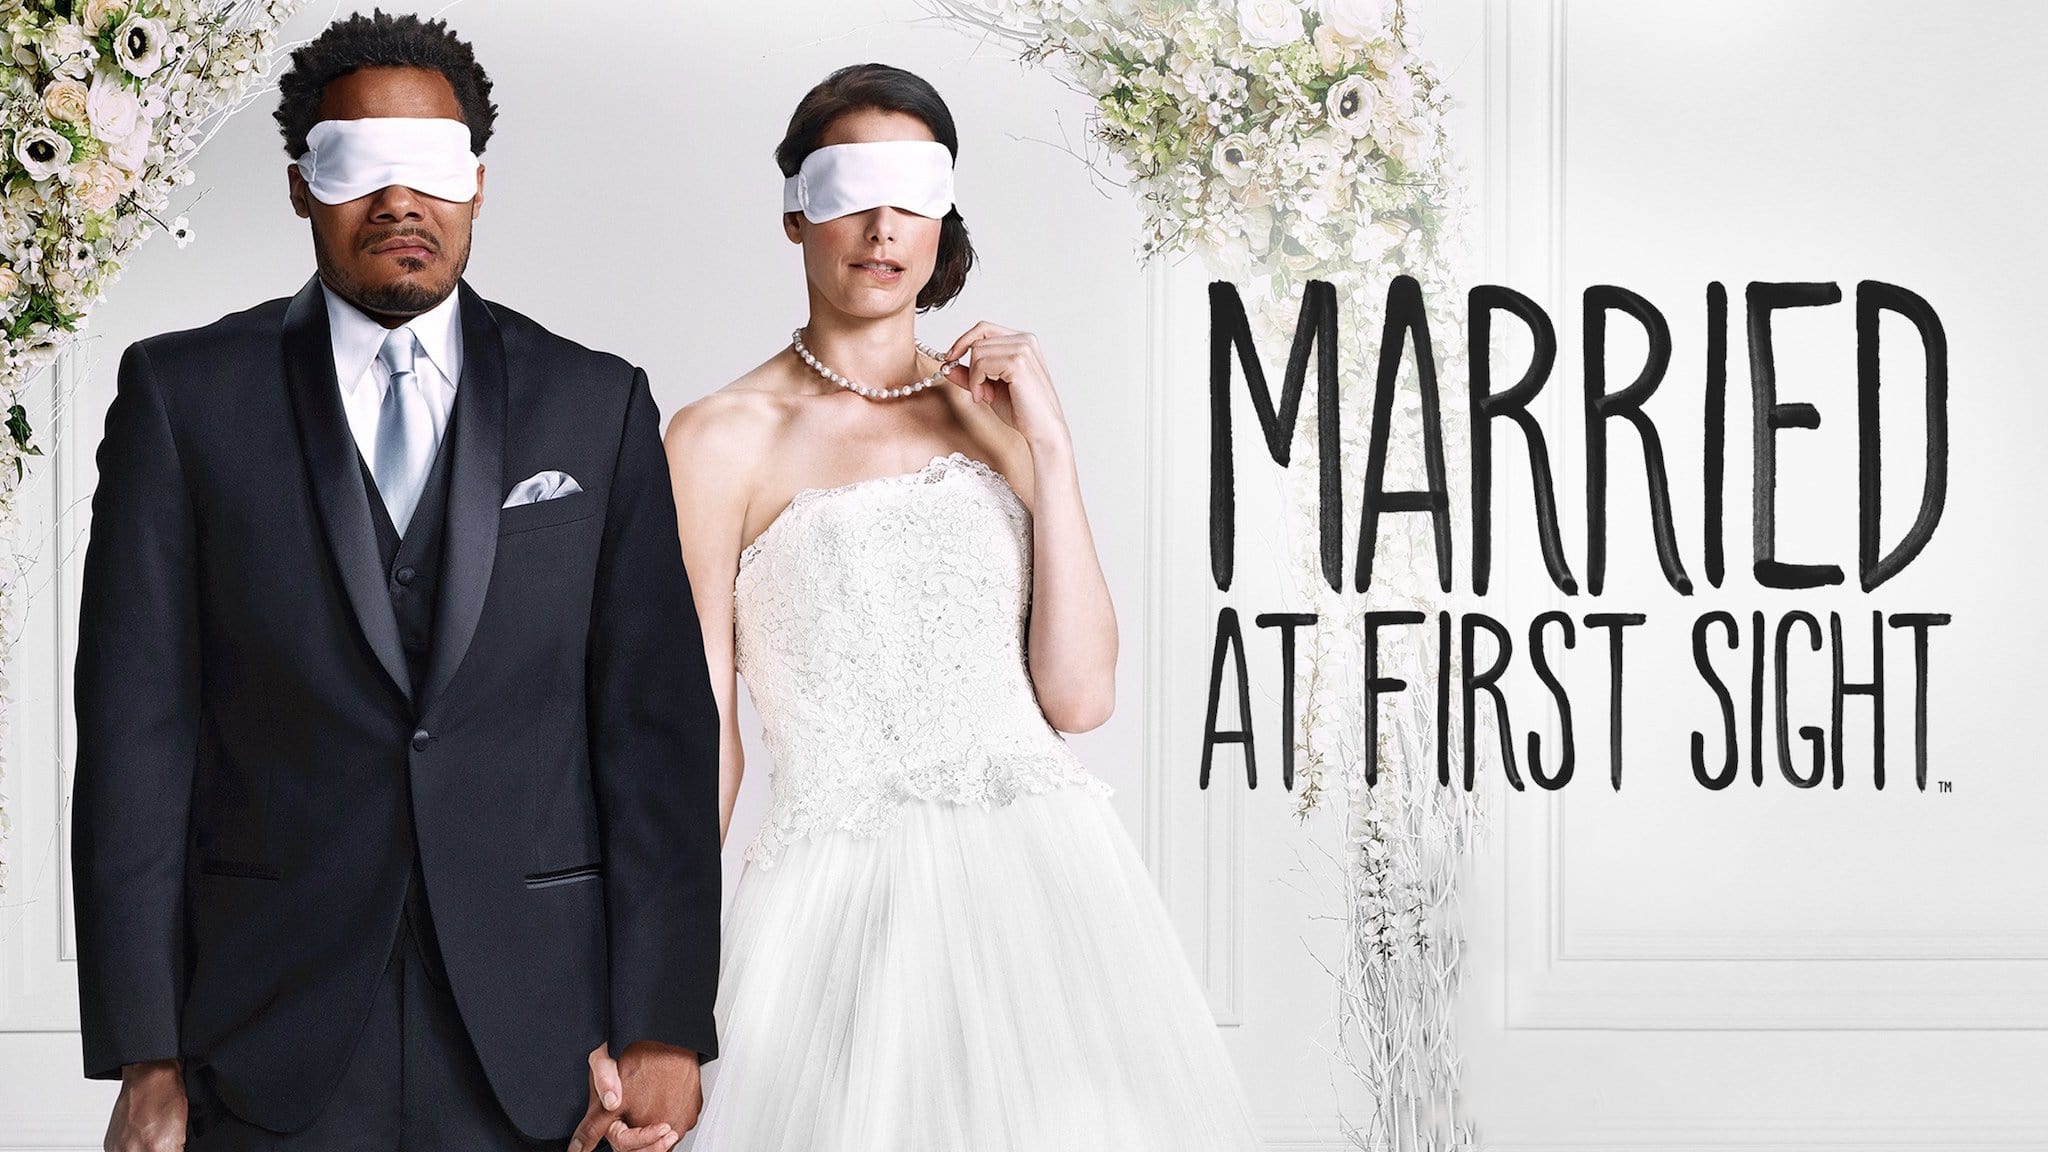 Married at First Sight UK - Season 7 Episode 29